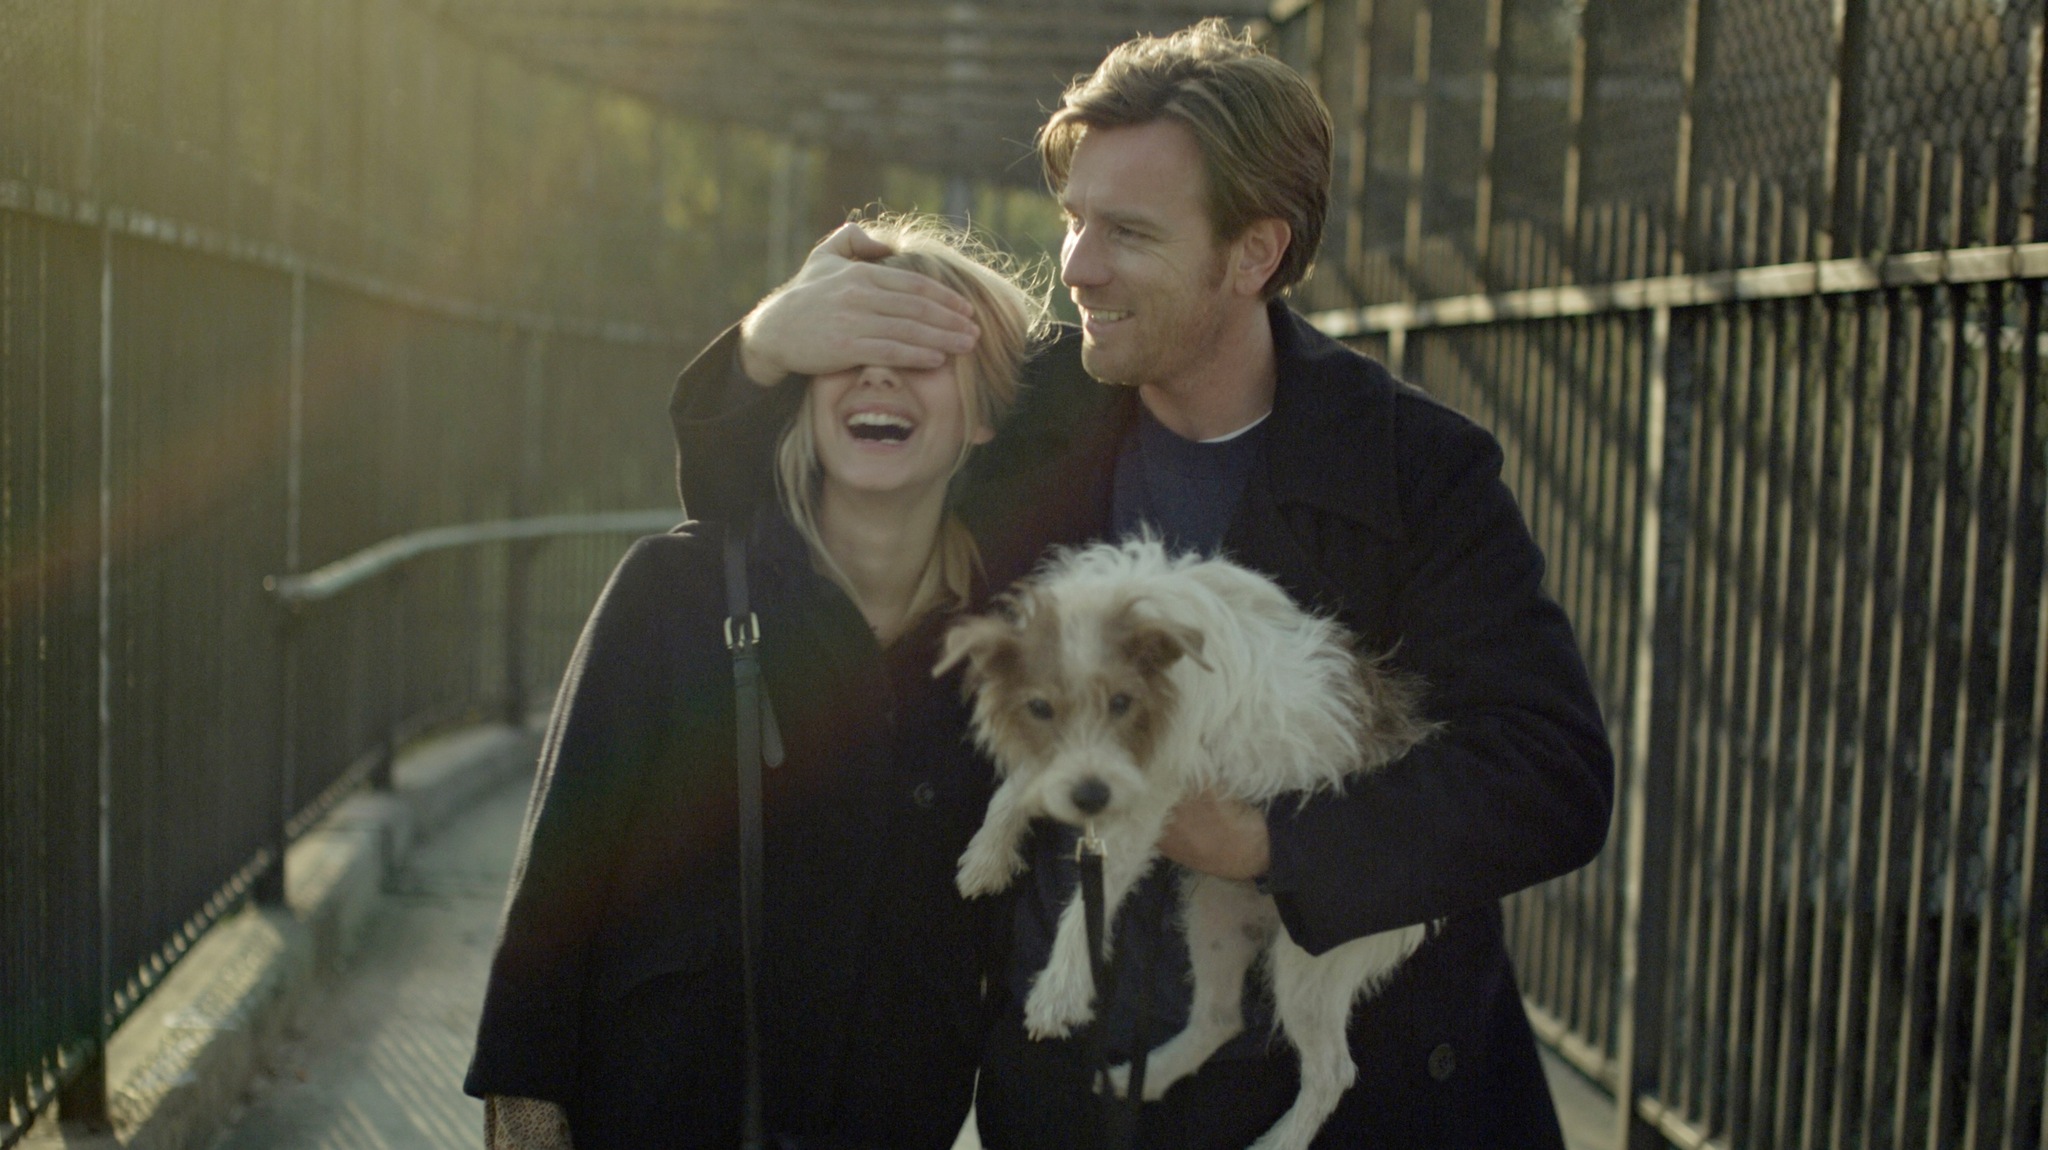 Mélanie Laurent (left) and Ewan McGregor (right) star in writer/director Mike Mills’ BEGINNERS.